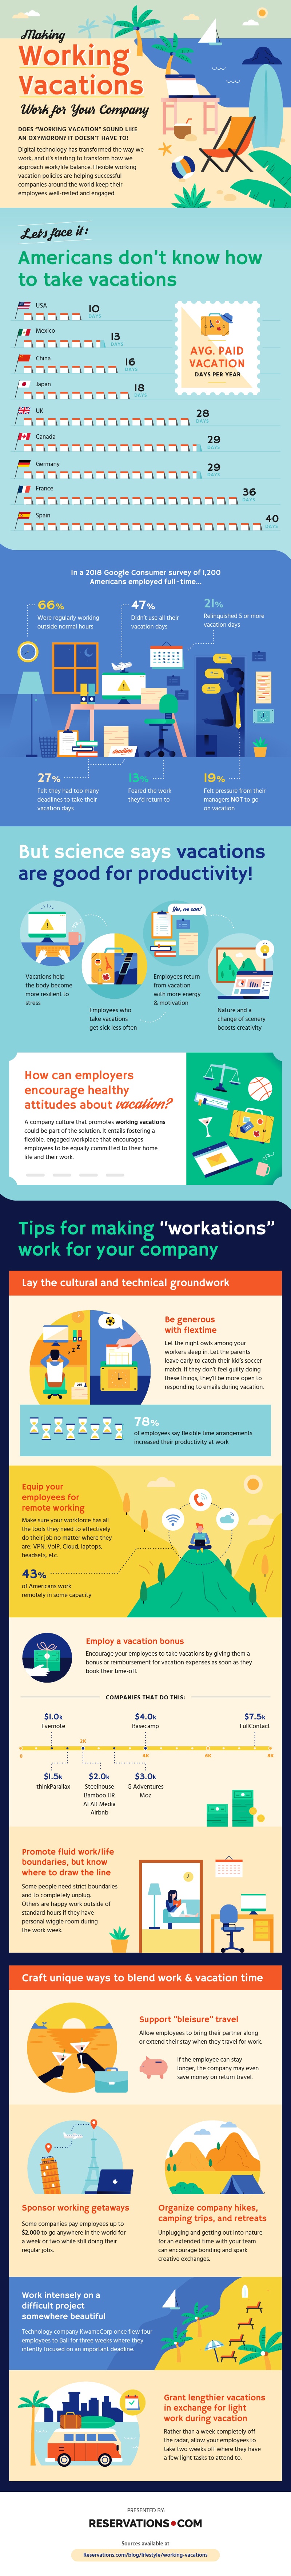 Making Workcations Work For Your Company